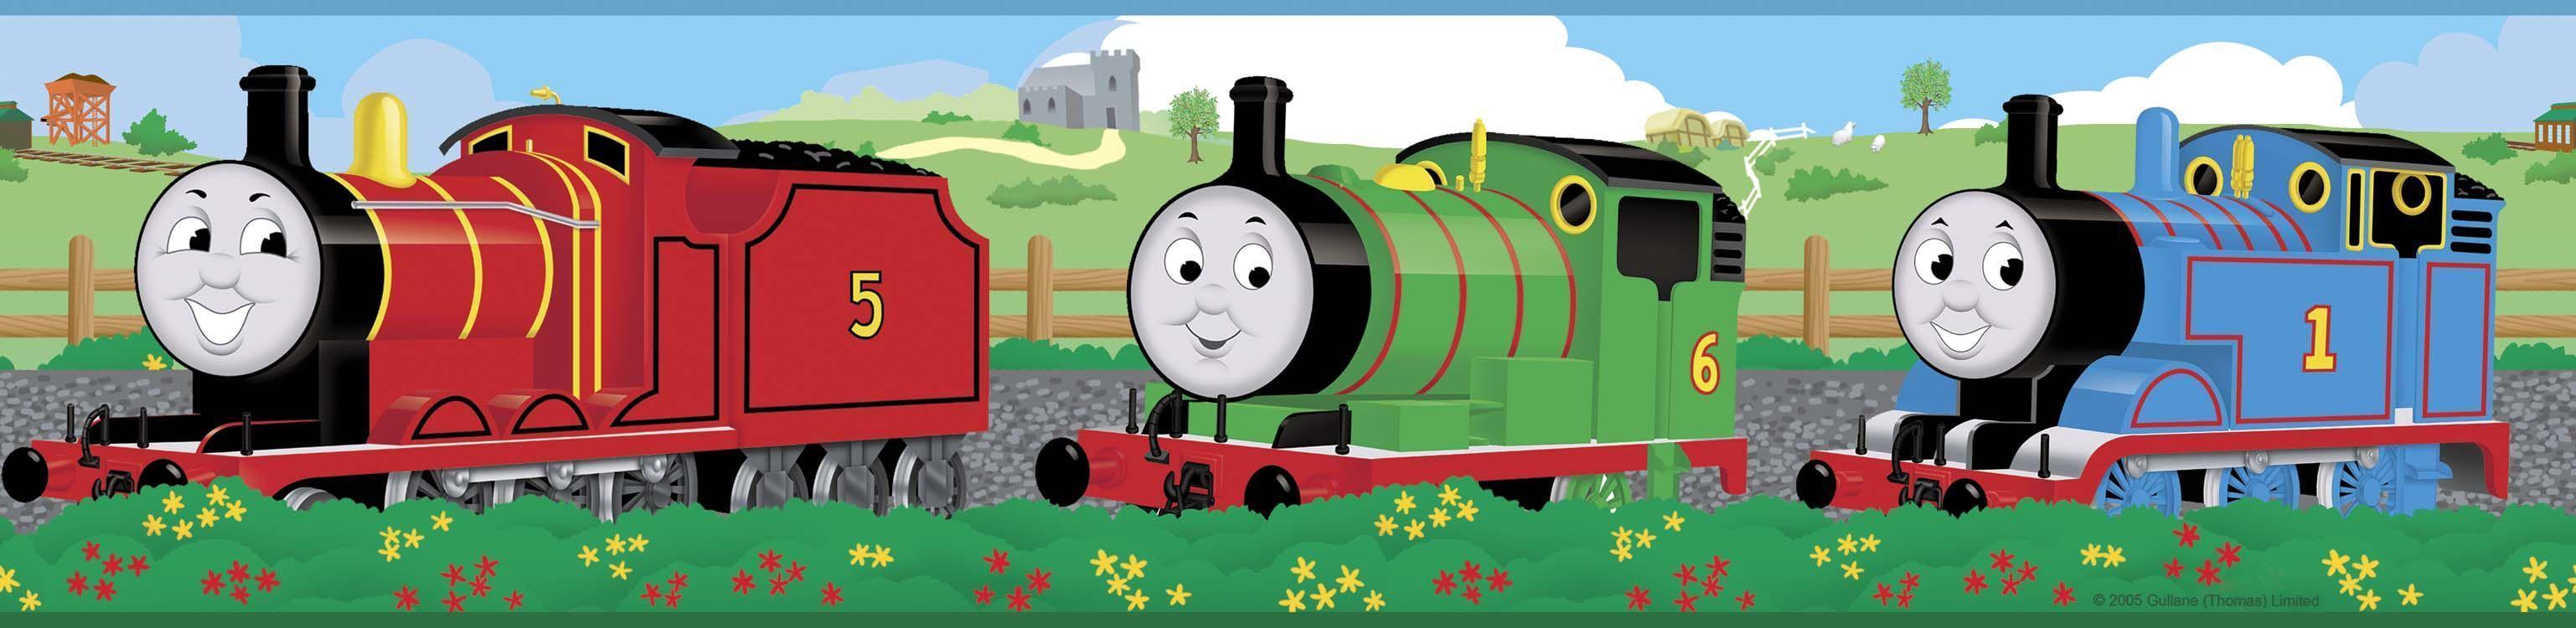 Thomas And Friends Wallpaper